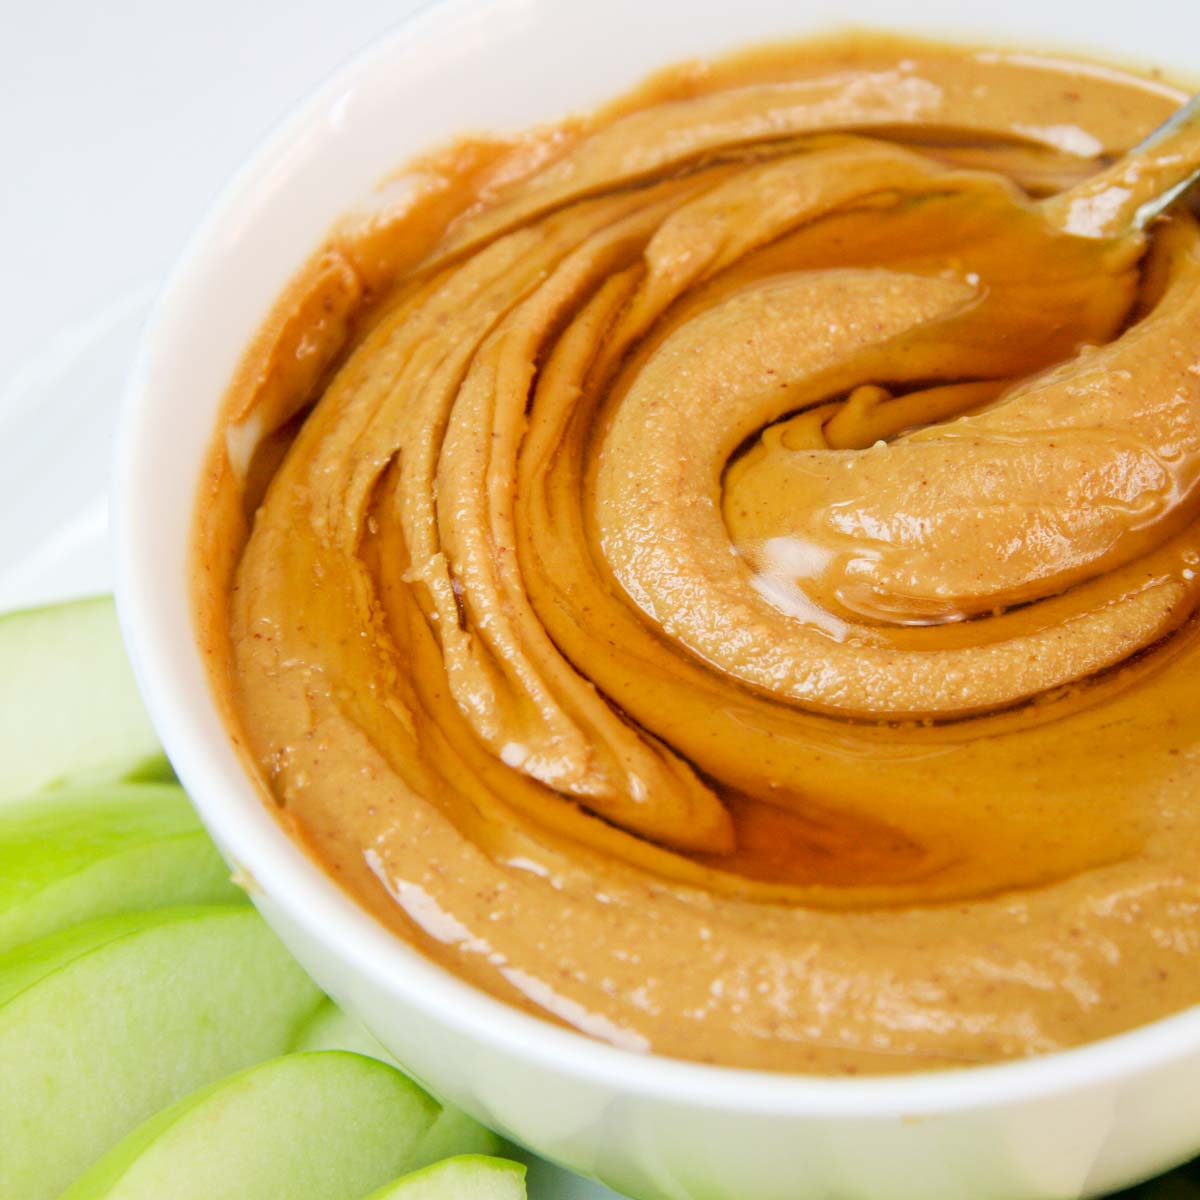 Apples & The Perfect Honey Peanut Butter Dip